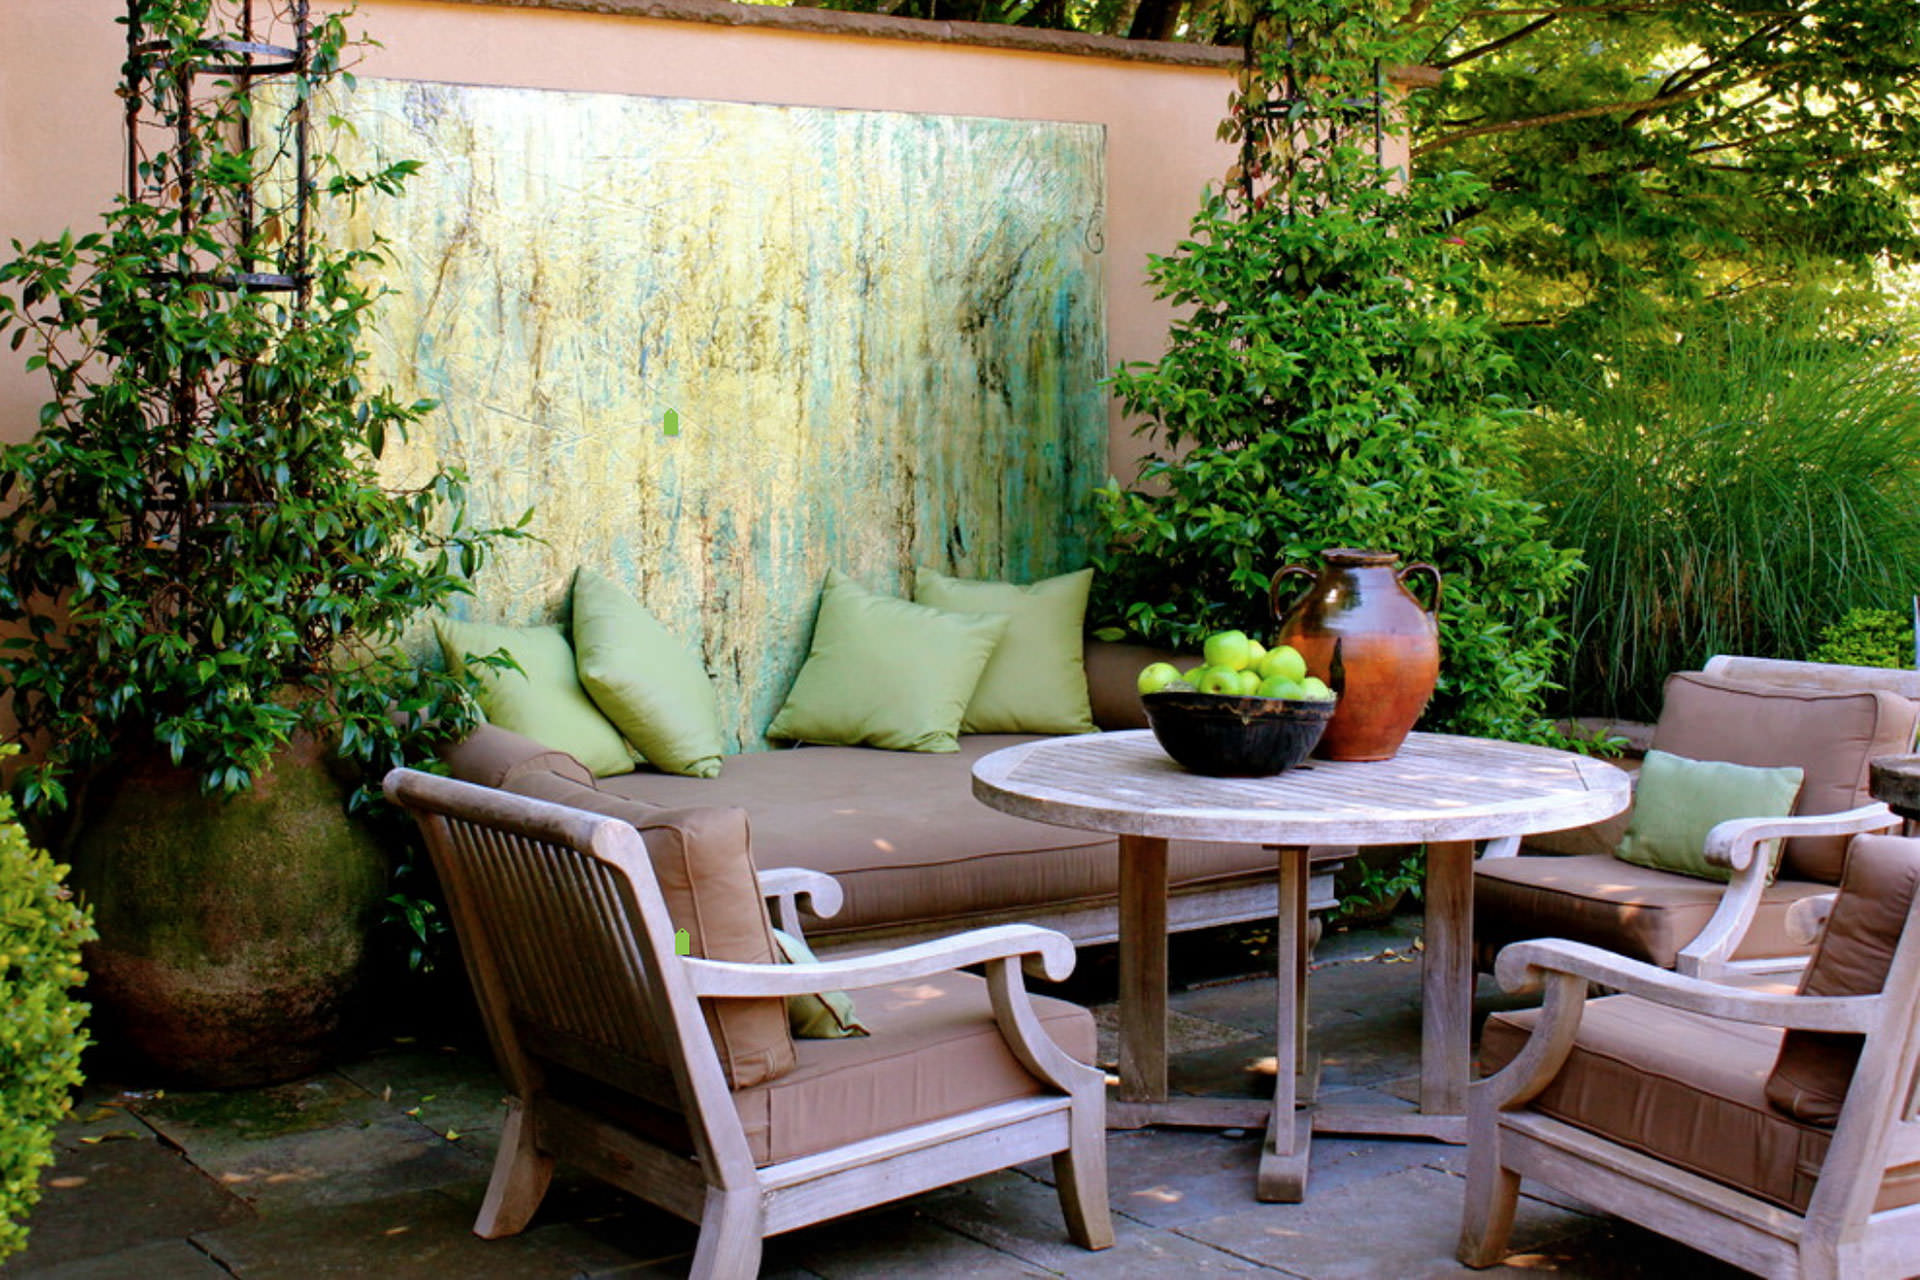 Outdoor Ambiance and Personality Through Accessories